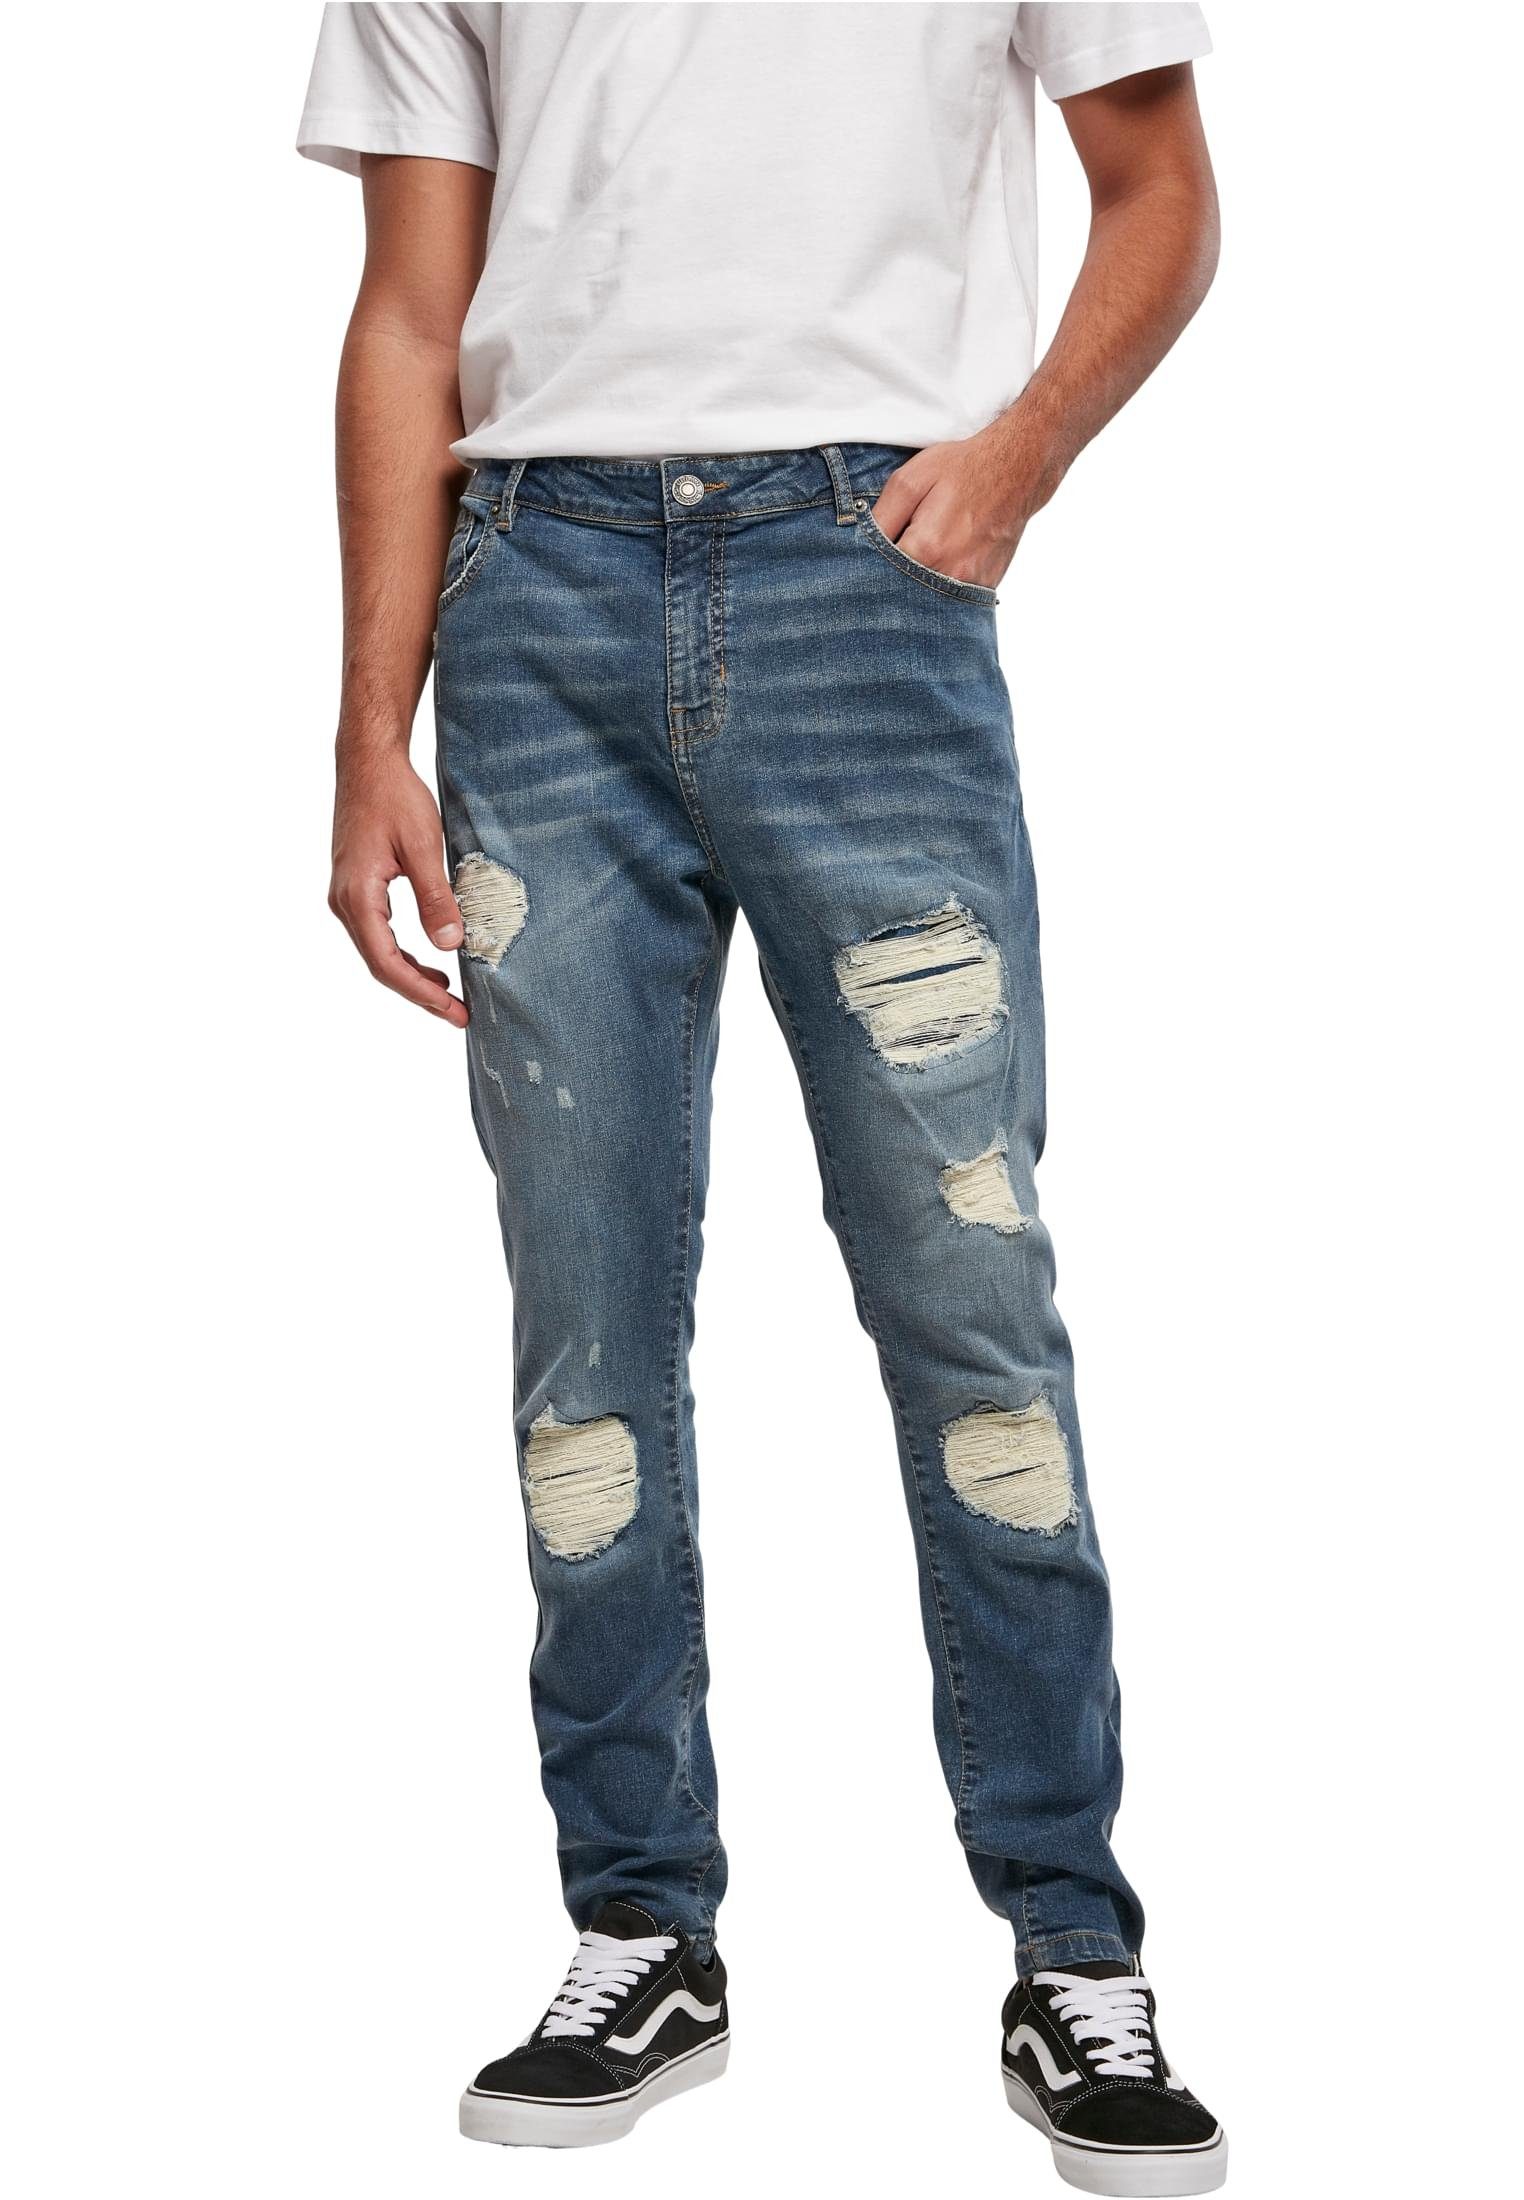 URBAN CLASSICS Bequeme Jeans Herren Heavy Destroyed Slim Fit Jeans (1-tlg) blue-heavy-destroyed-washed